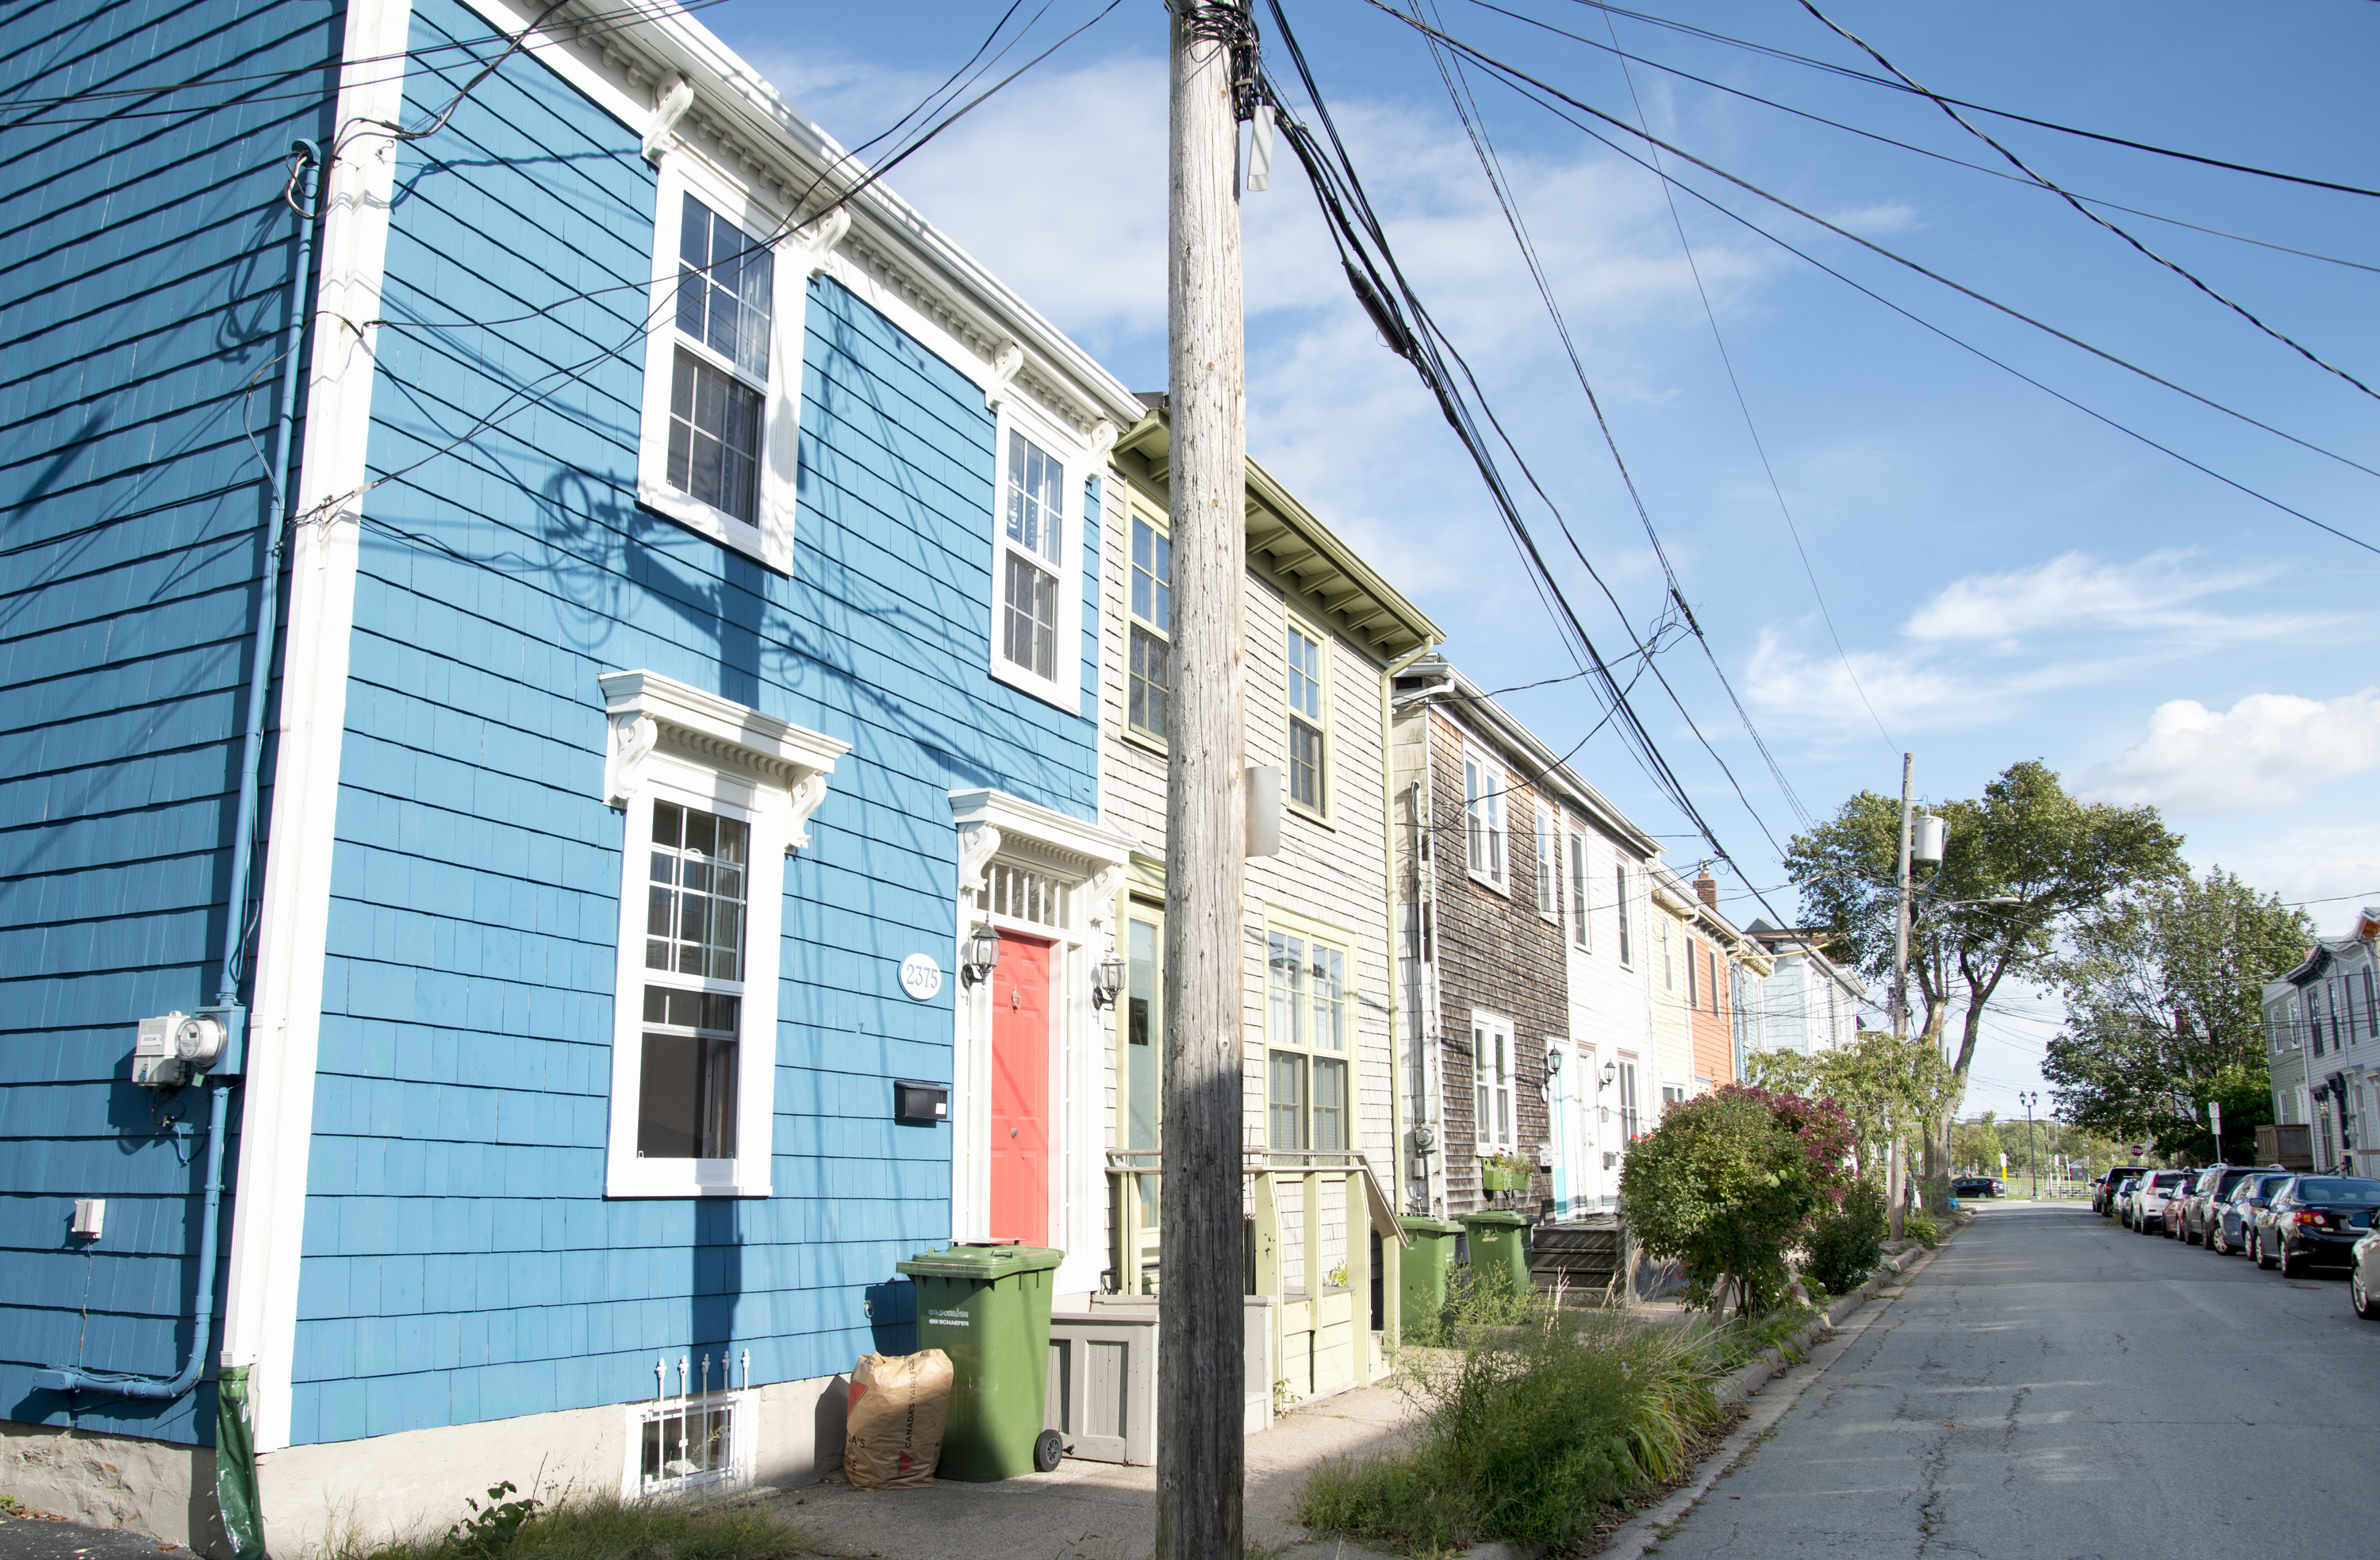 Quaint street with different colored small houses in Halifax